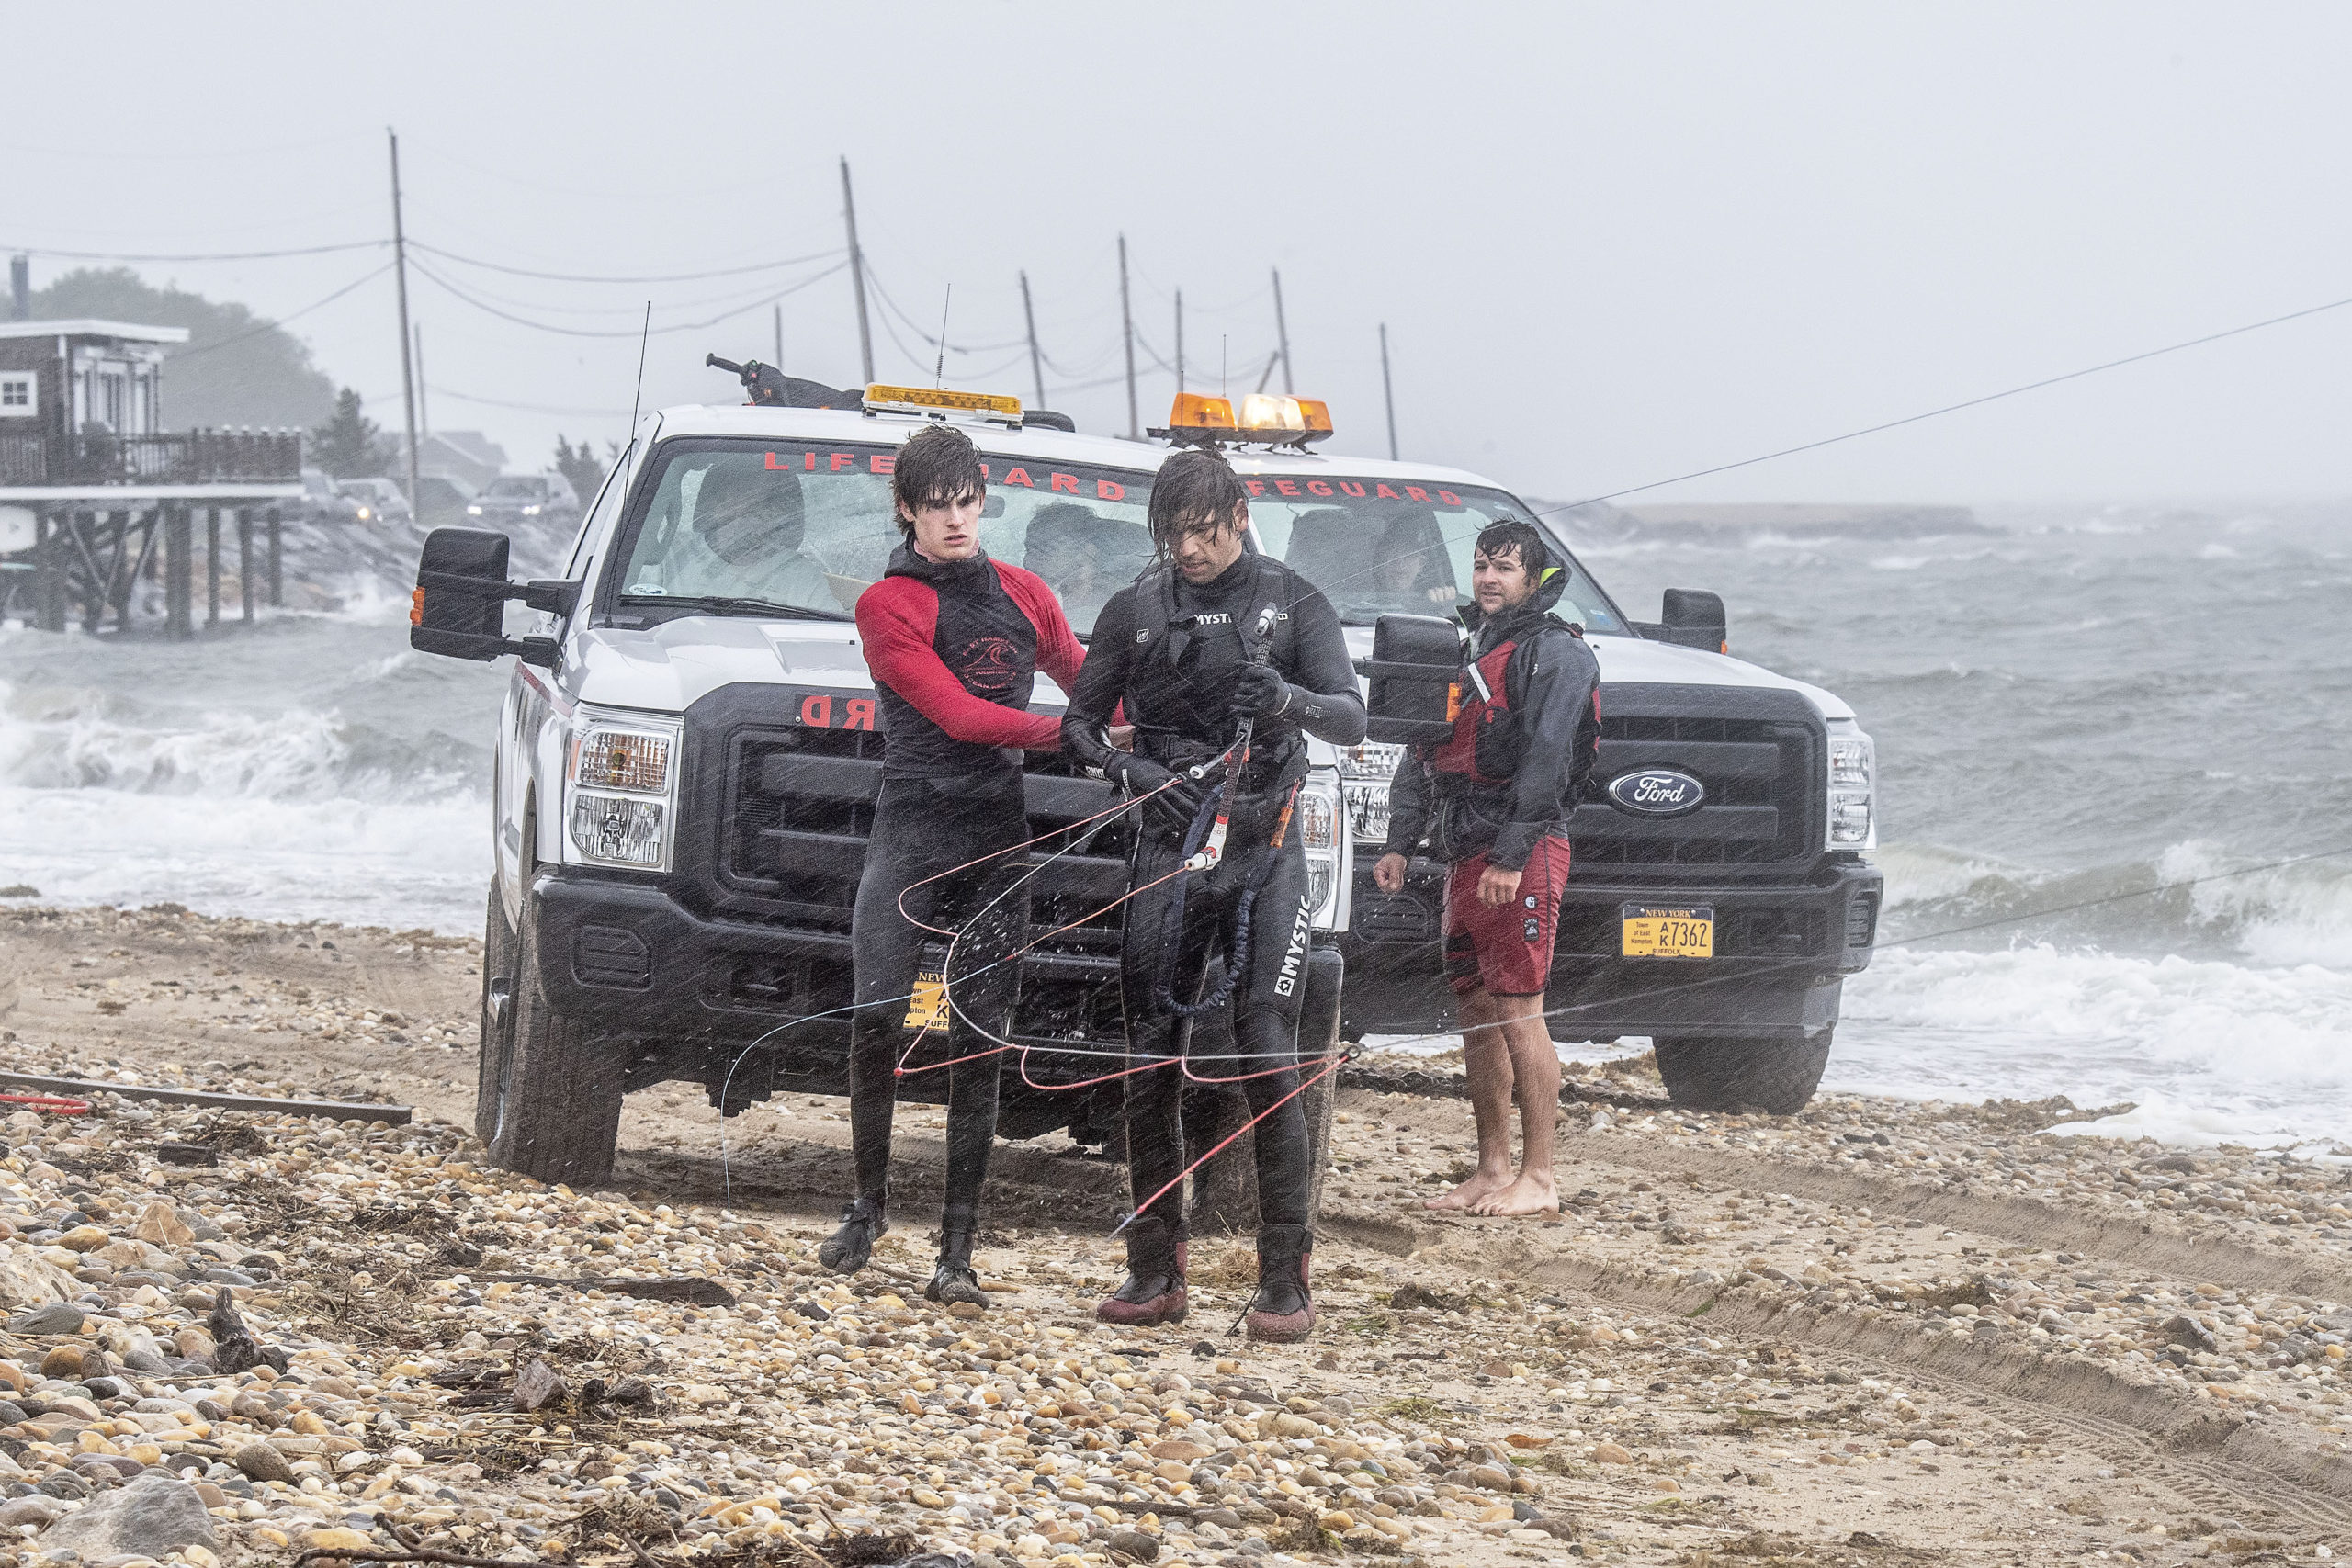 Members of the East Hampton Ocean Rescue Team used a jetski and sled to help with rescuing two kiteboarders who were caught out in the gale-force winds and rough waters east of Gerard Drive in Springs.